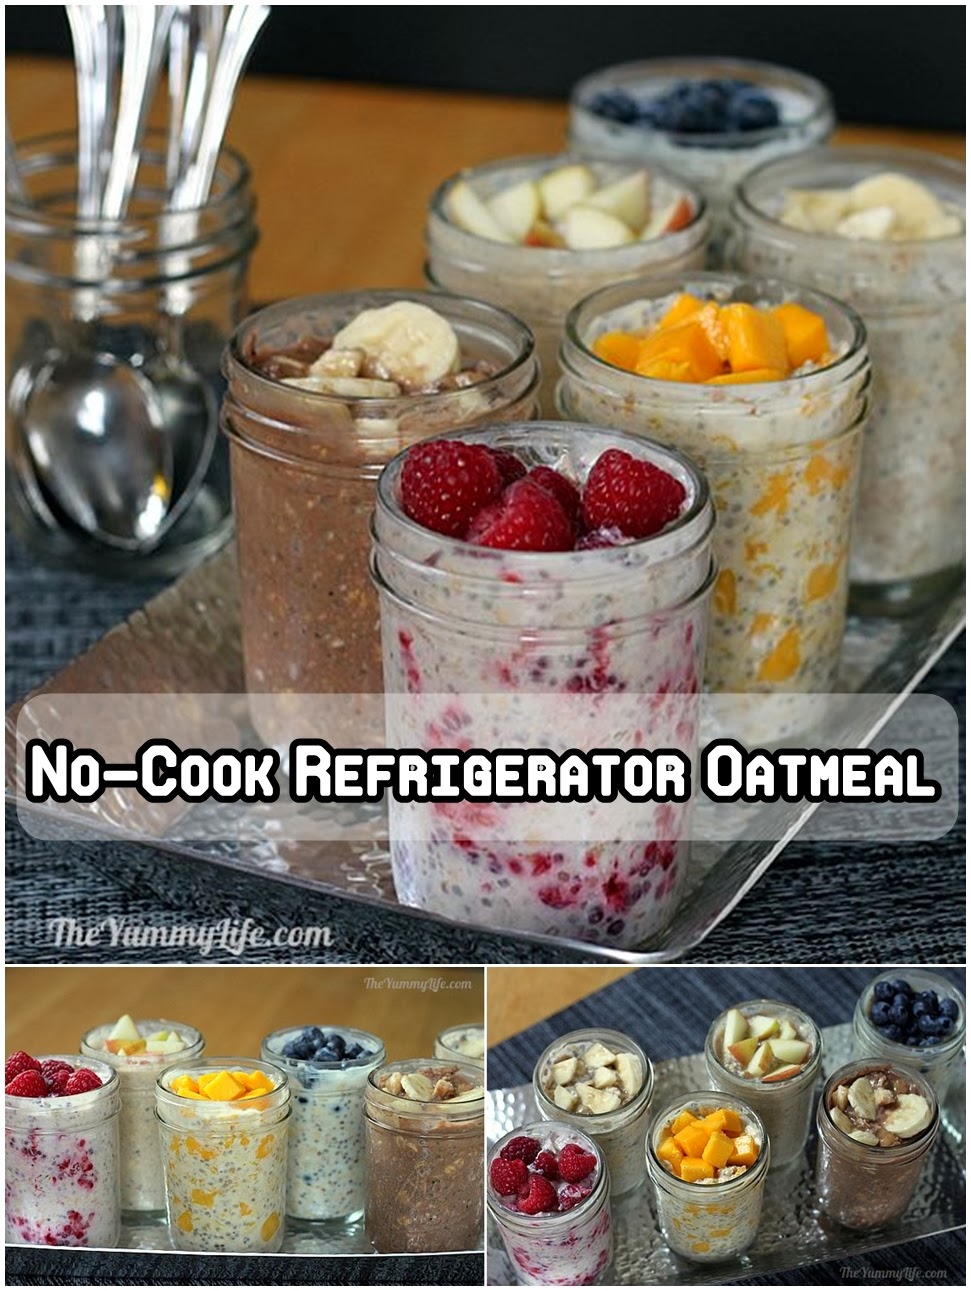 No-Cook Refrigerator Oatmeal Recipe - DIY Craft Projects